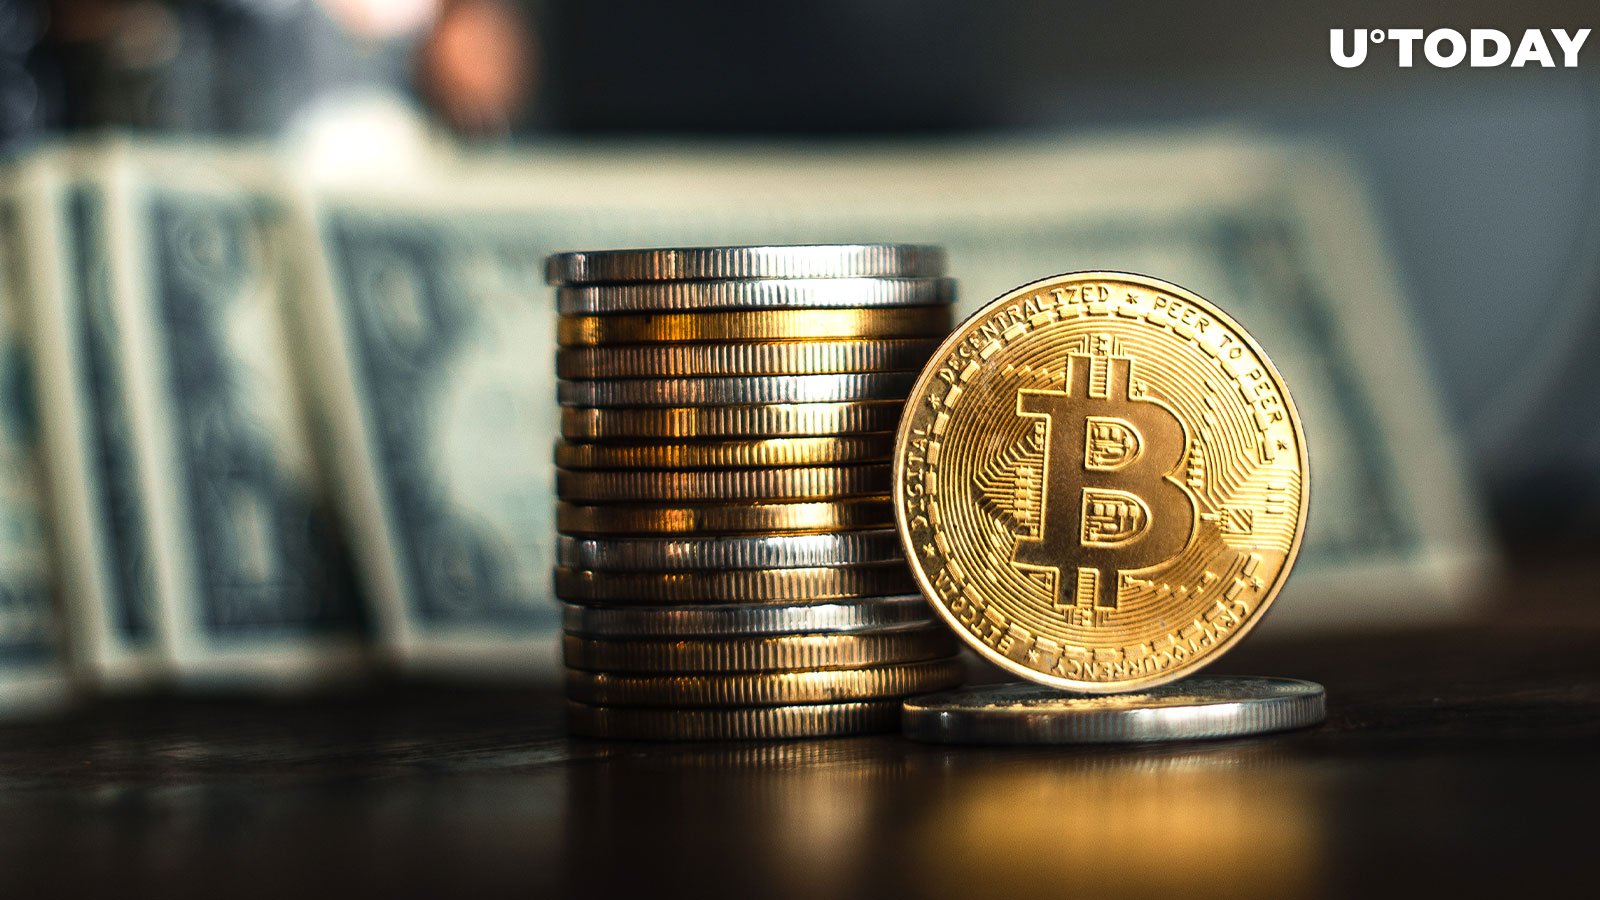 Bitcoin Sees Major Profit Taking by Short-Term Holders